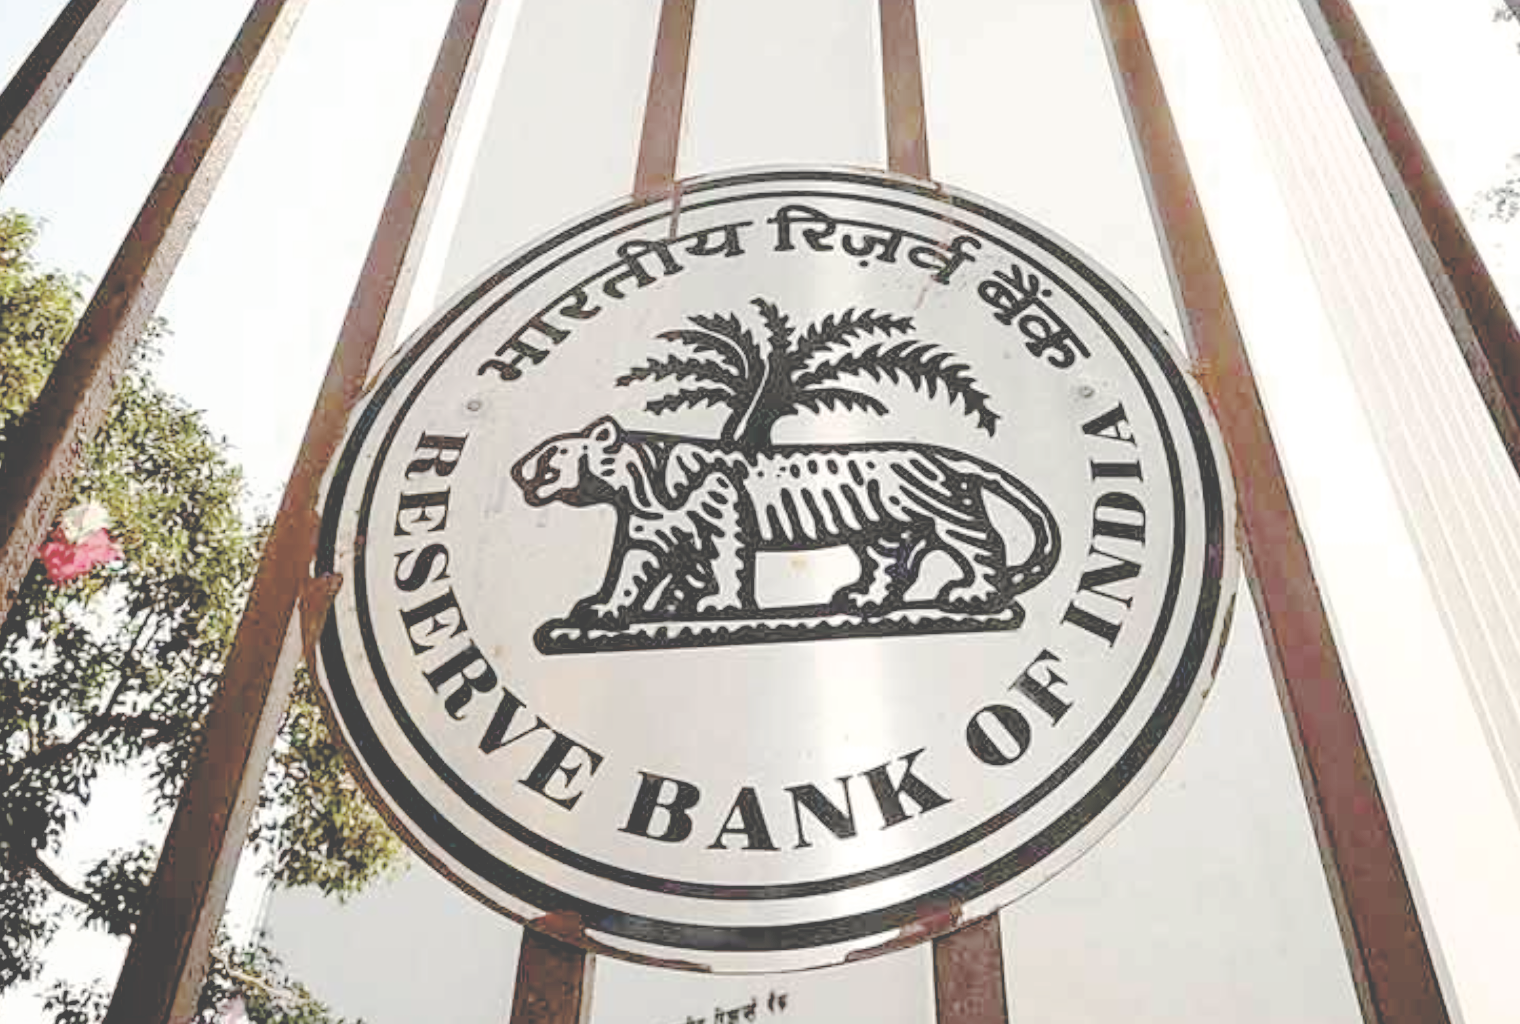 Protests Led RBI to Revise Bank's Withdrawal Limit